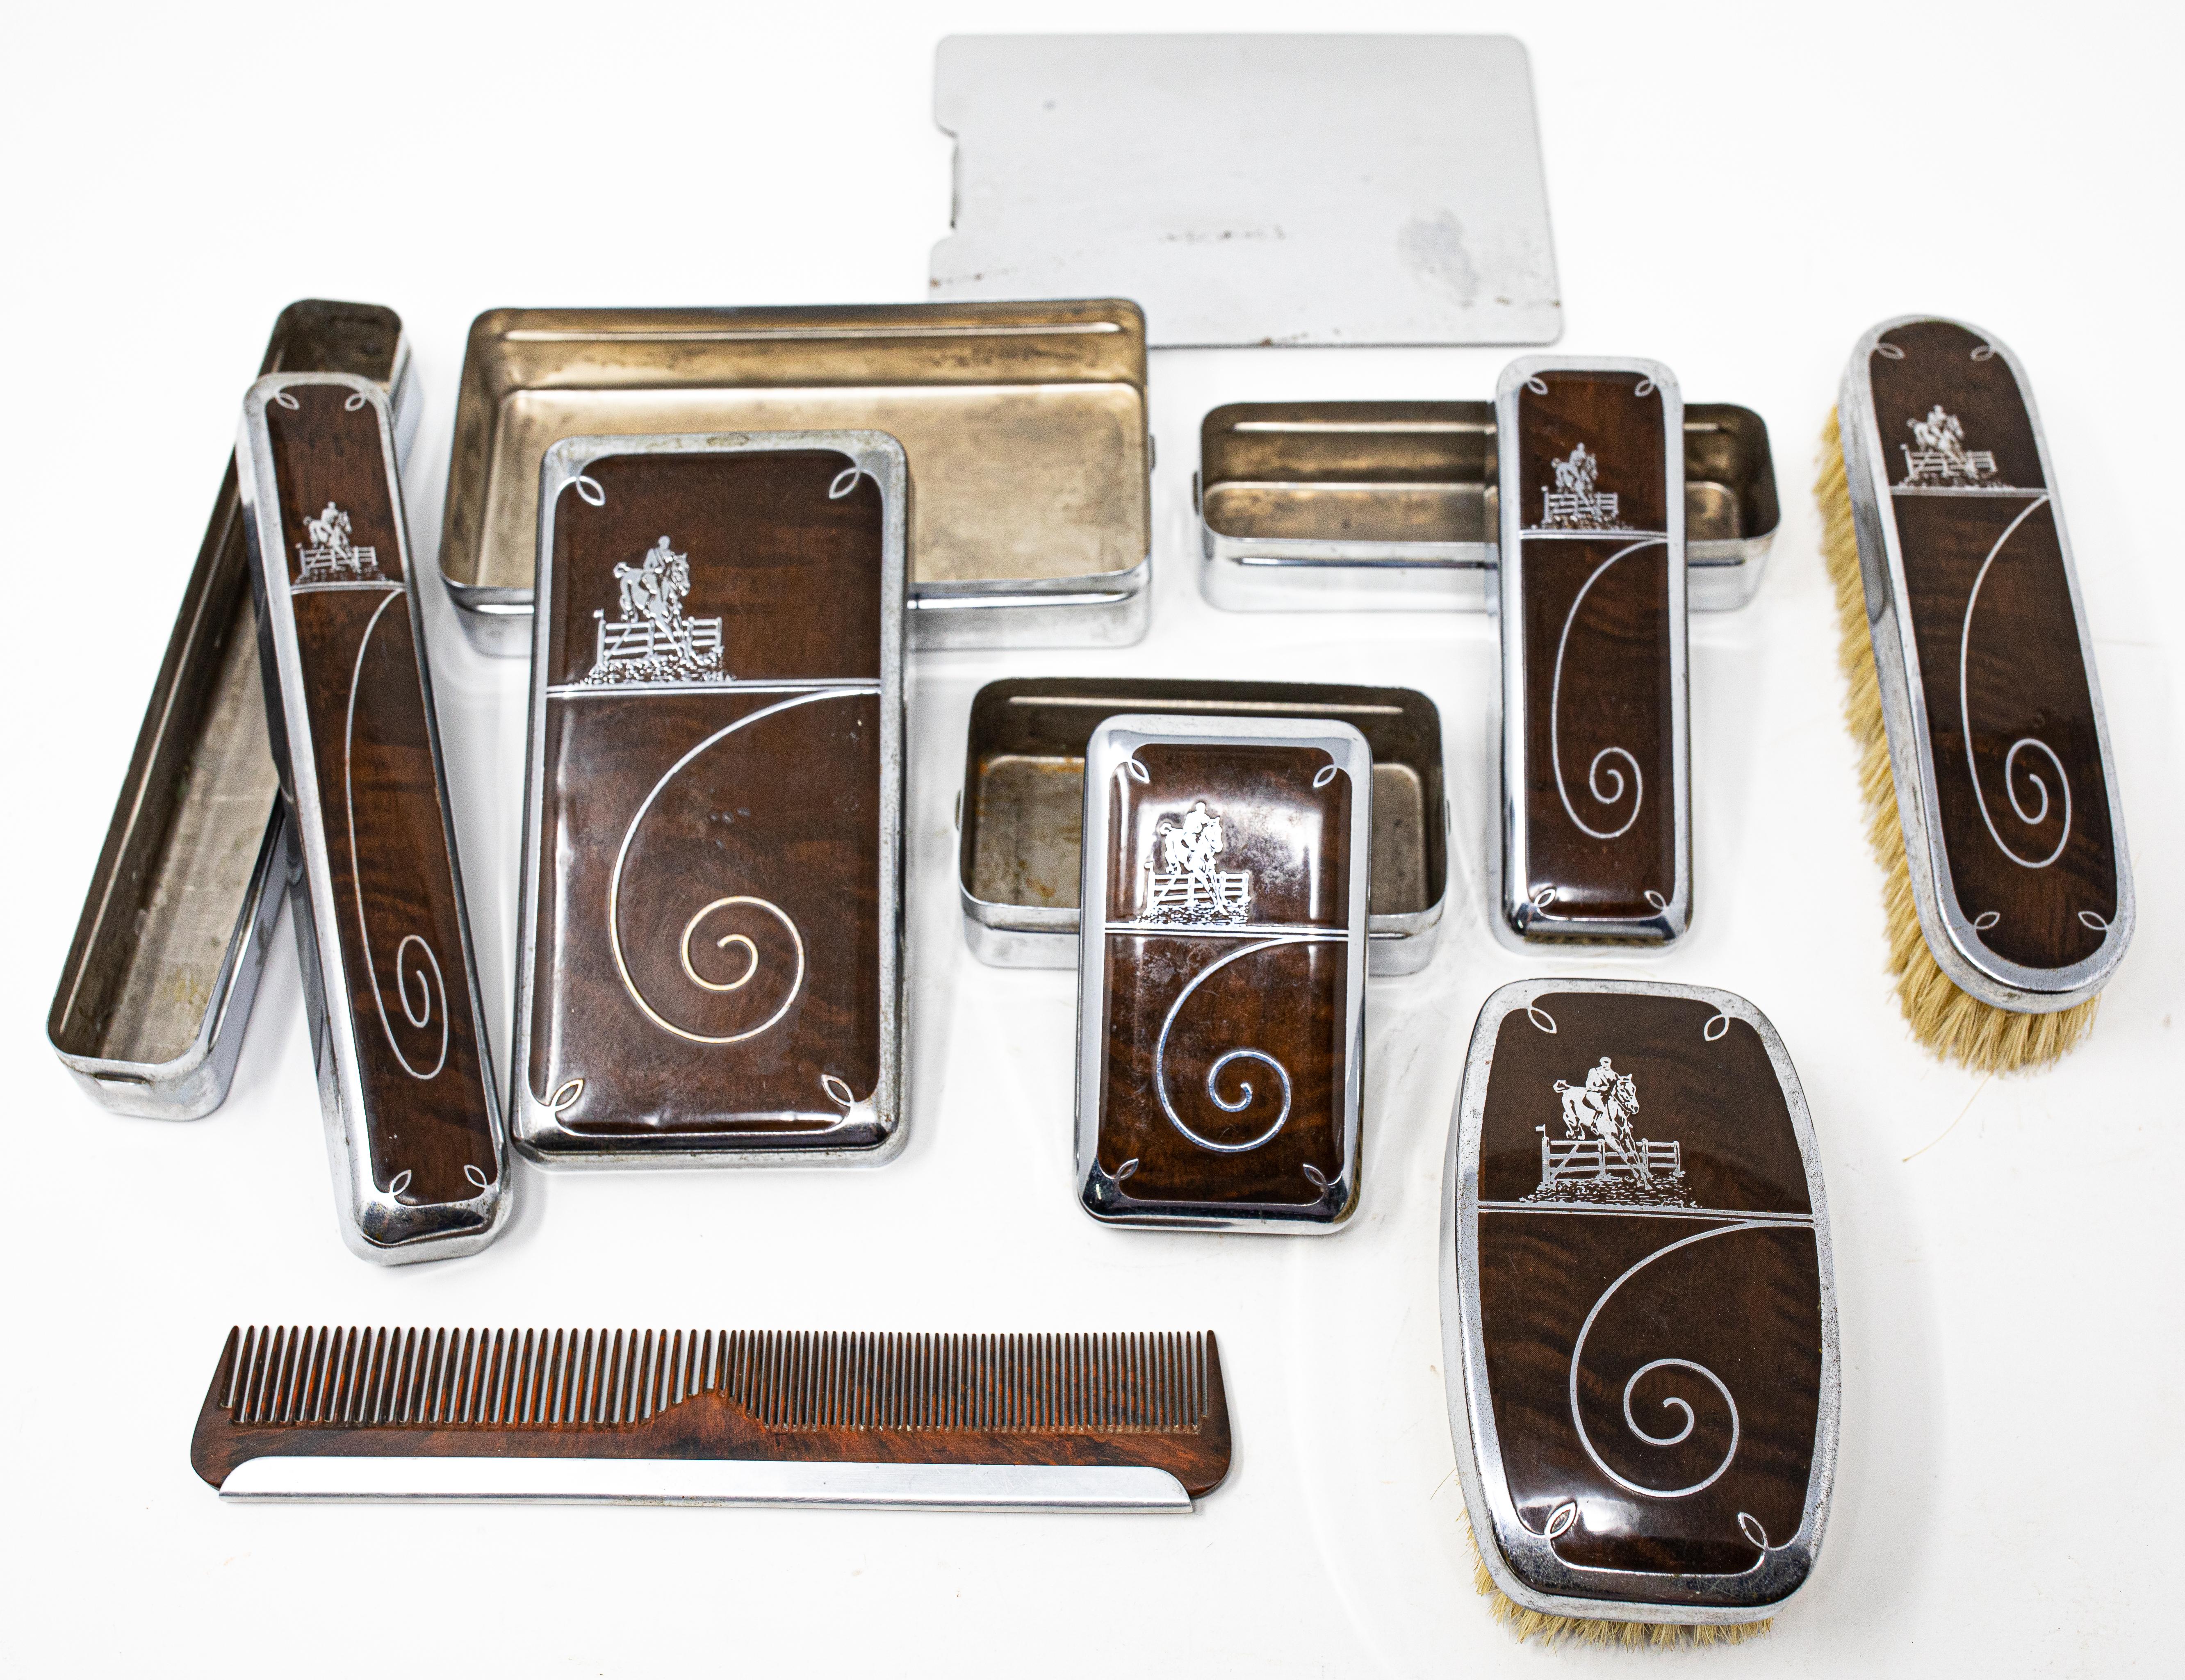 Men's Grooming Set Mid-Century Modern In Fair Condition For Sale In Cookeville, TN